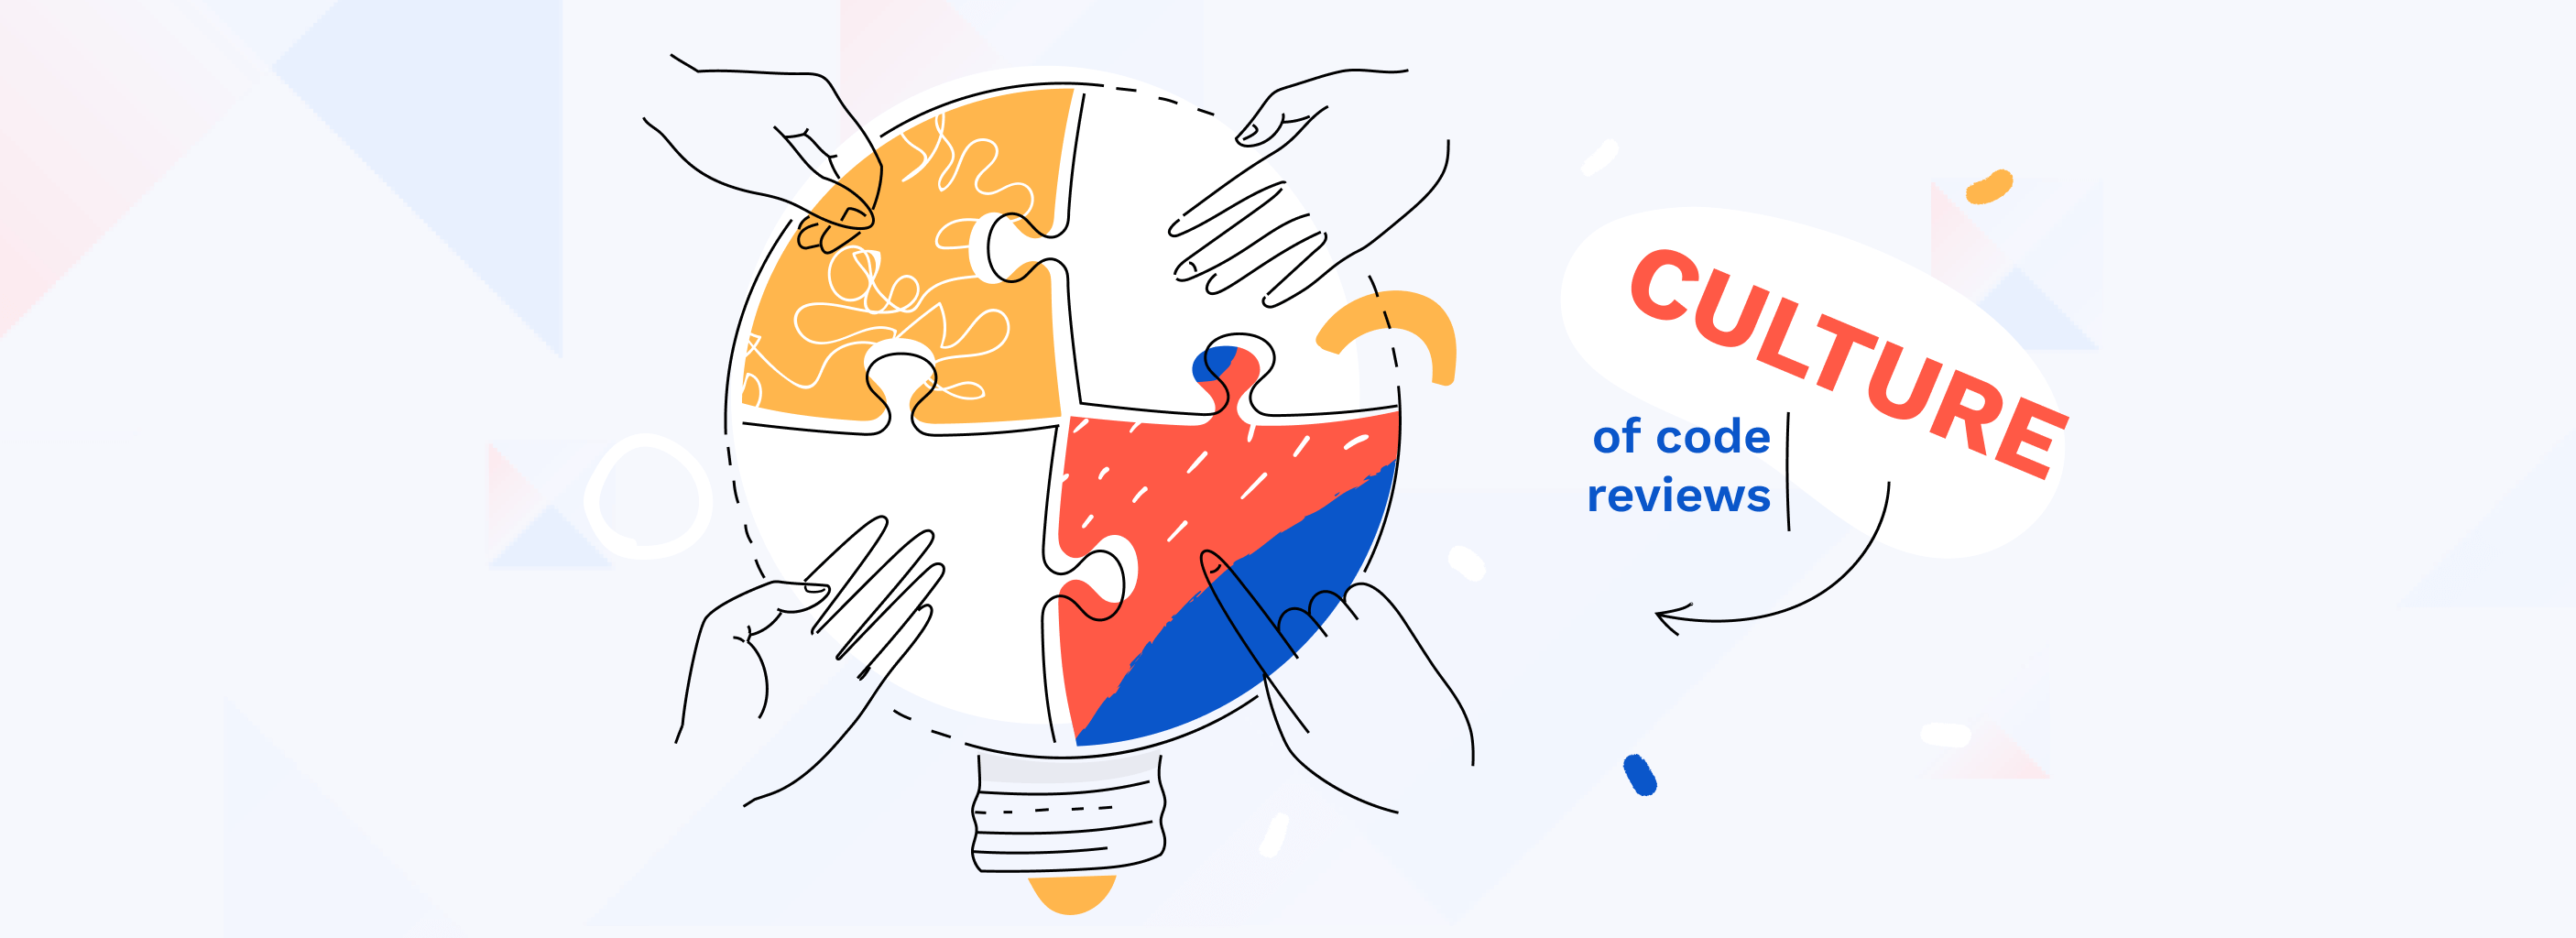 How to improve code review culture: this one is for managers and CTOs